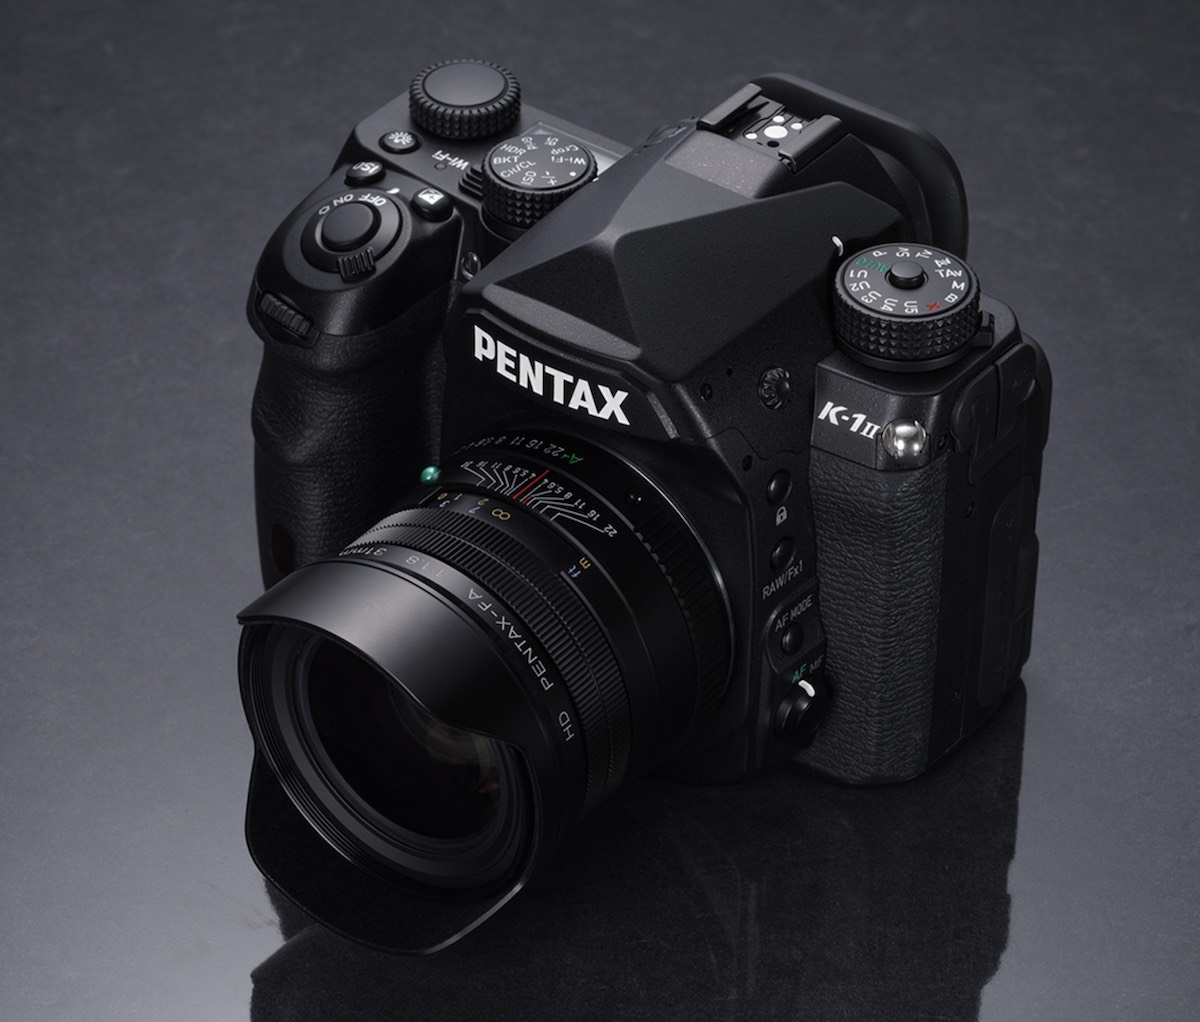 More picture of the new HD PENTAX-FA lenses Pentax & Ricoh Rumors